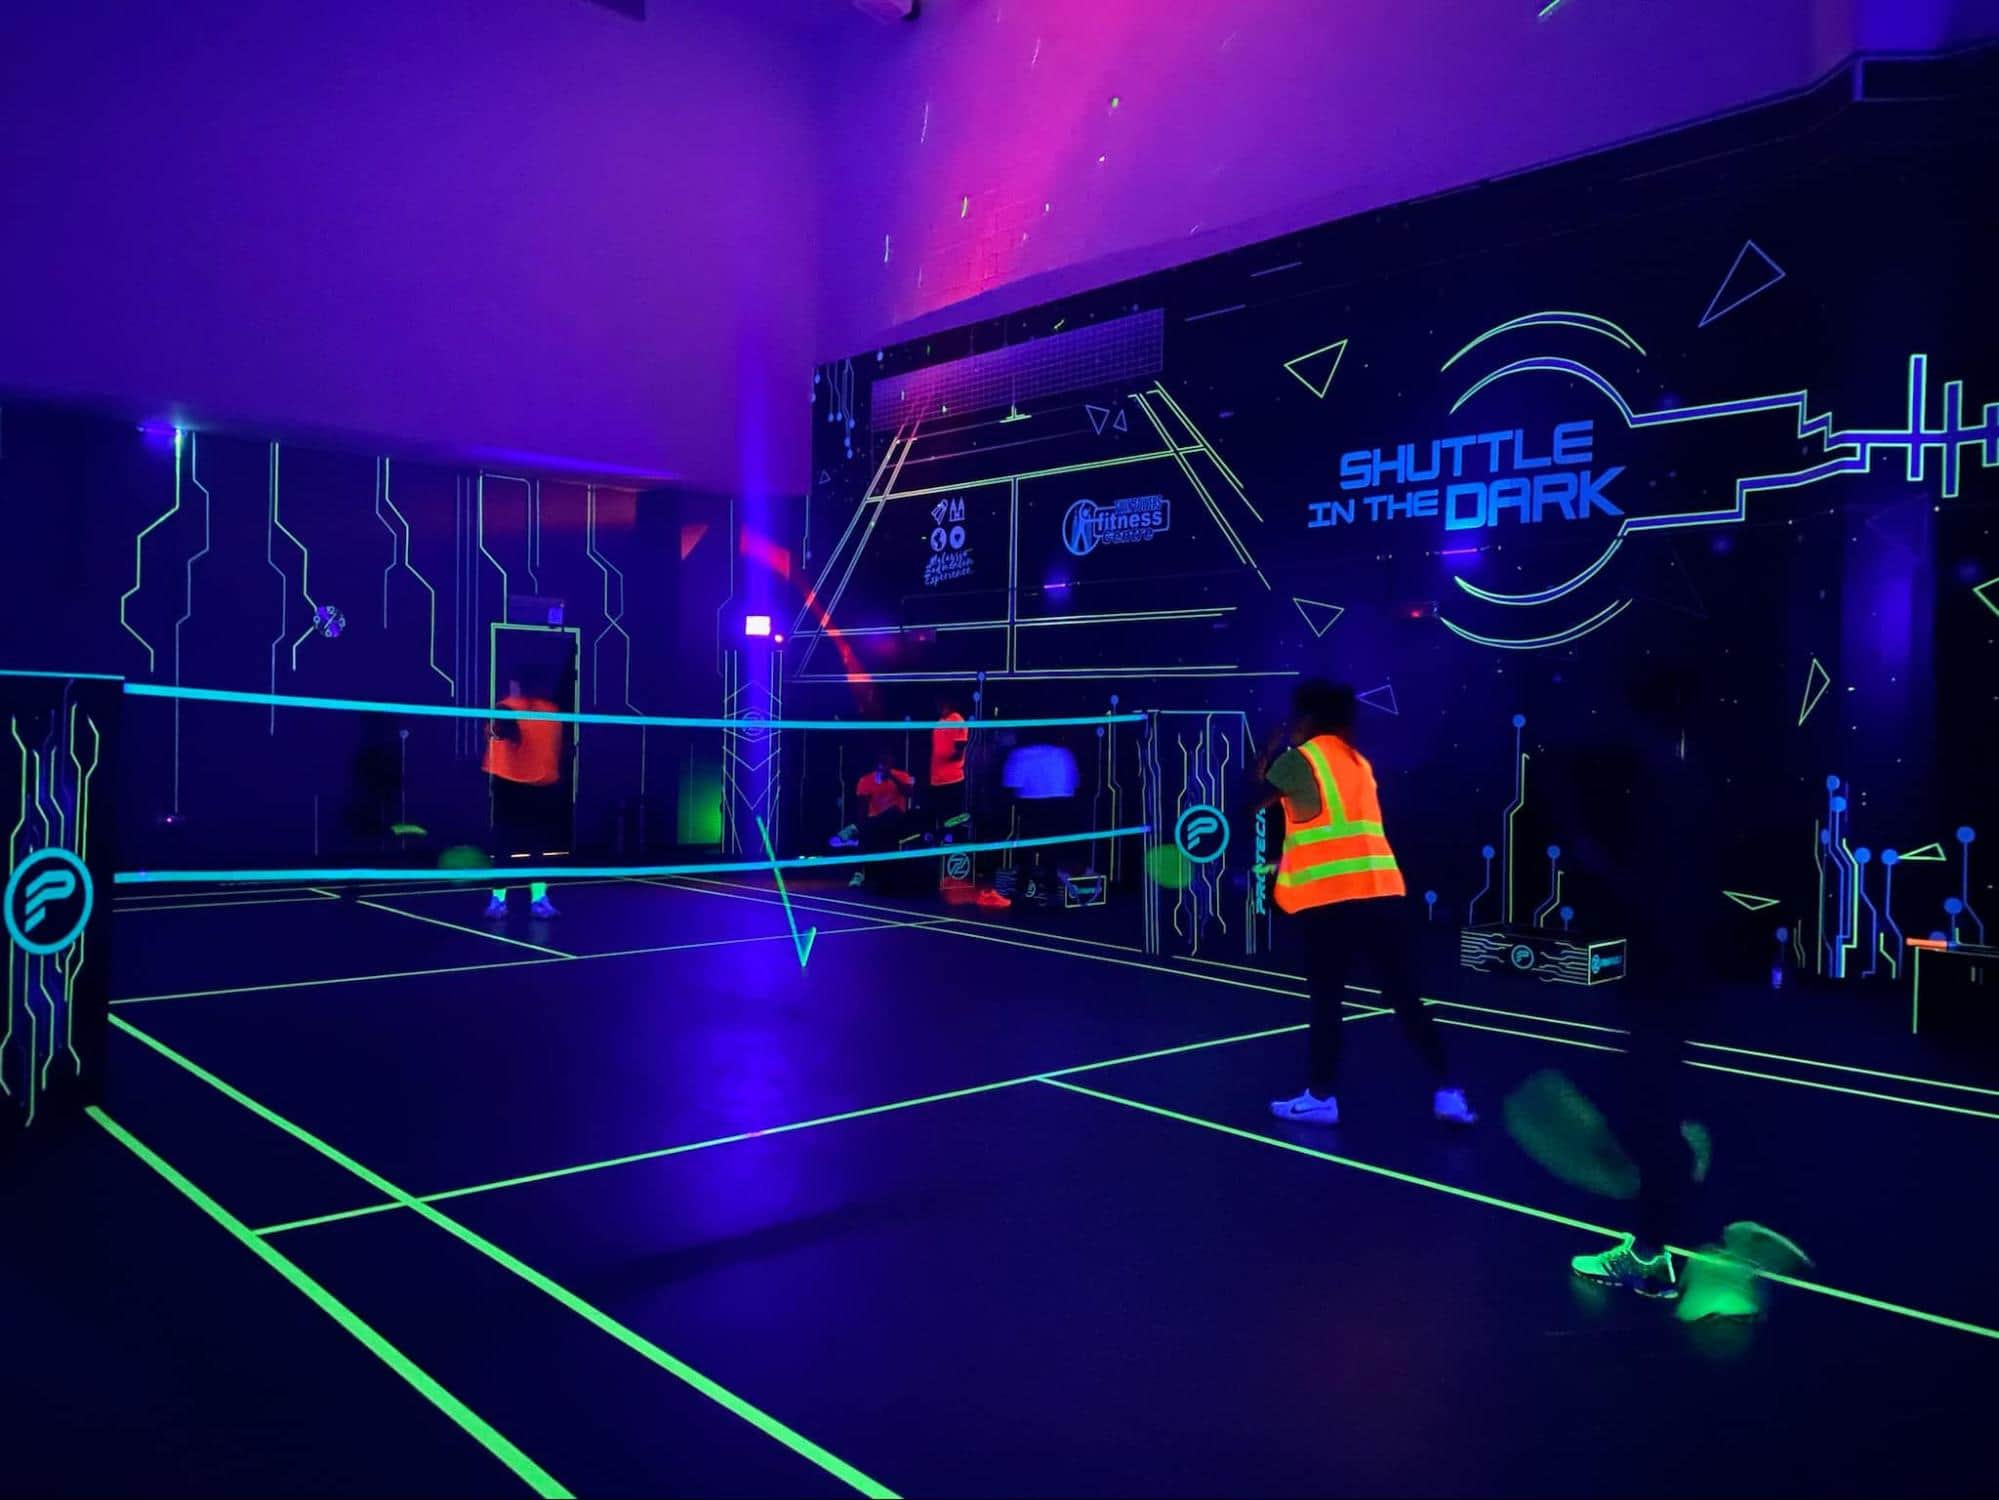 Things to do in KL - glow-in-the-dark badminton